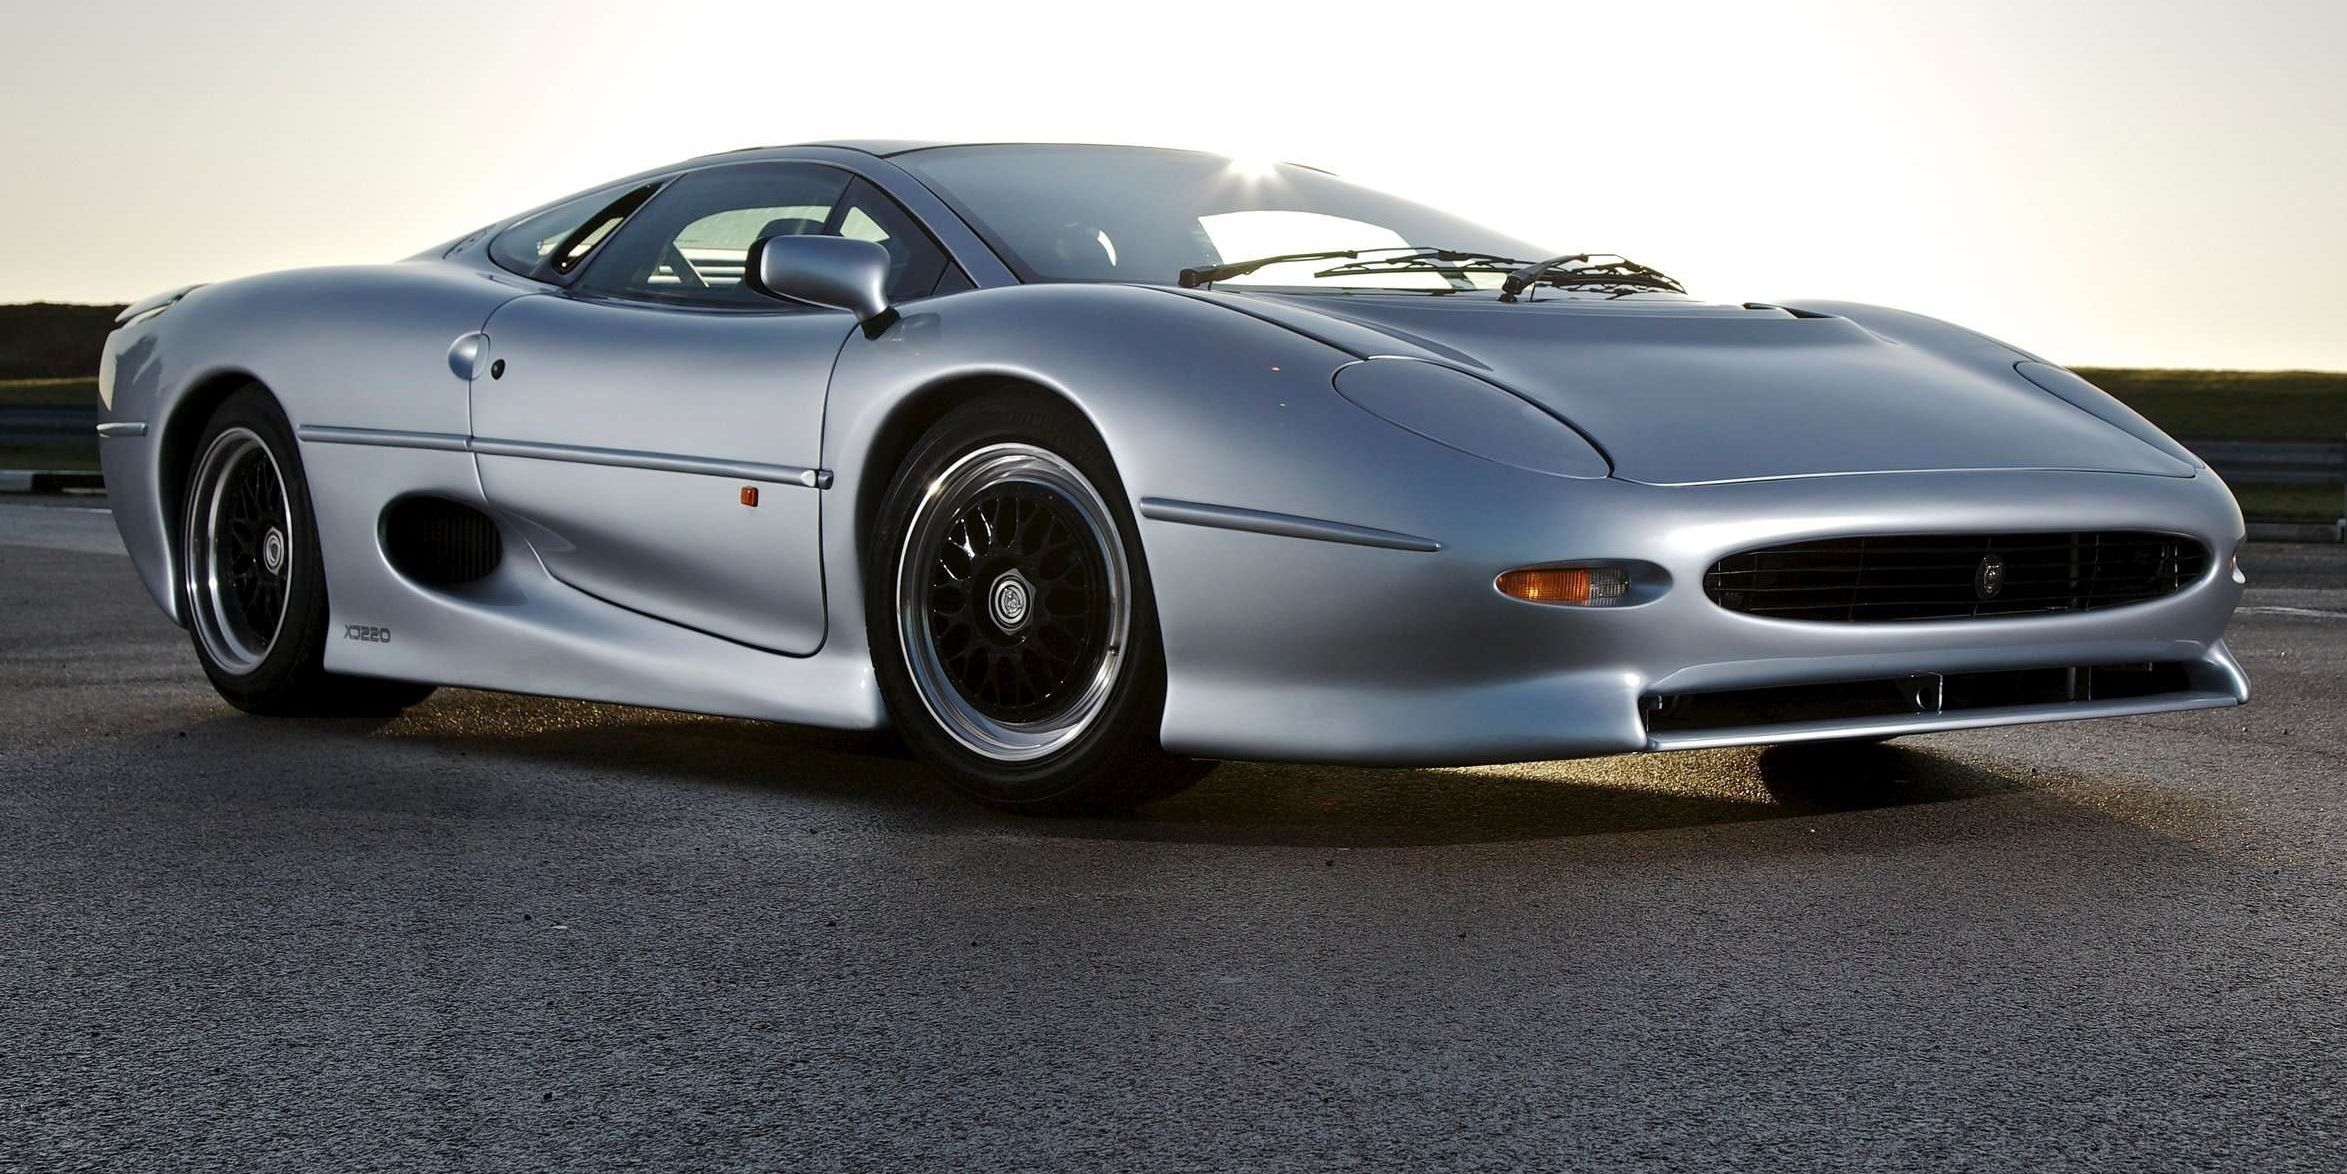 A side-view picture of a silver 1992 Jaguar XJ220